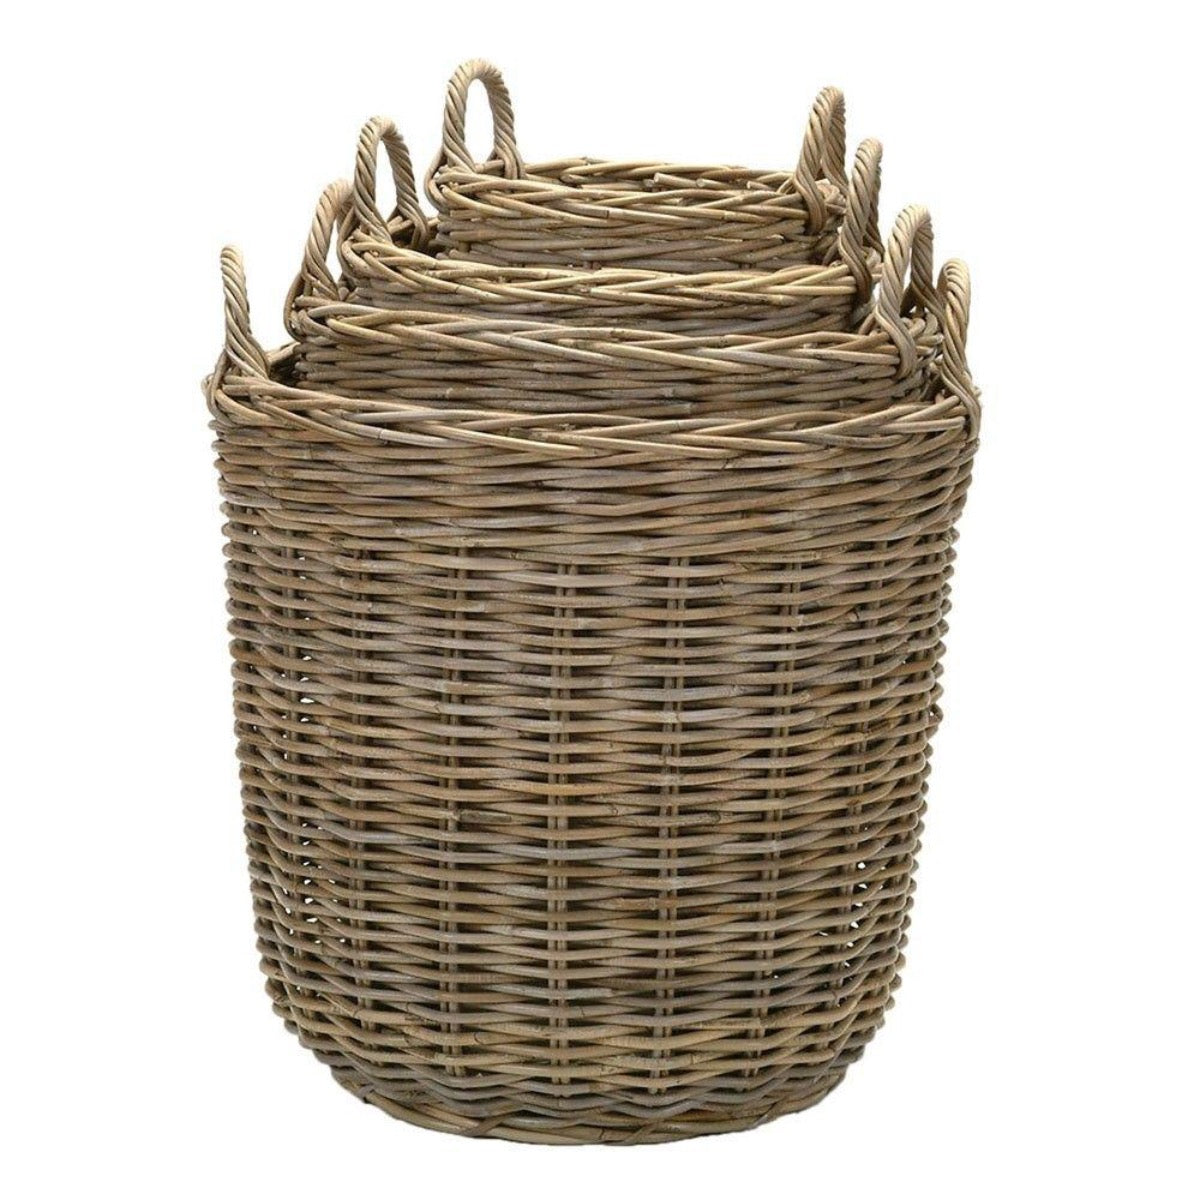 Woven Round Wicker Baskets. Front view.